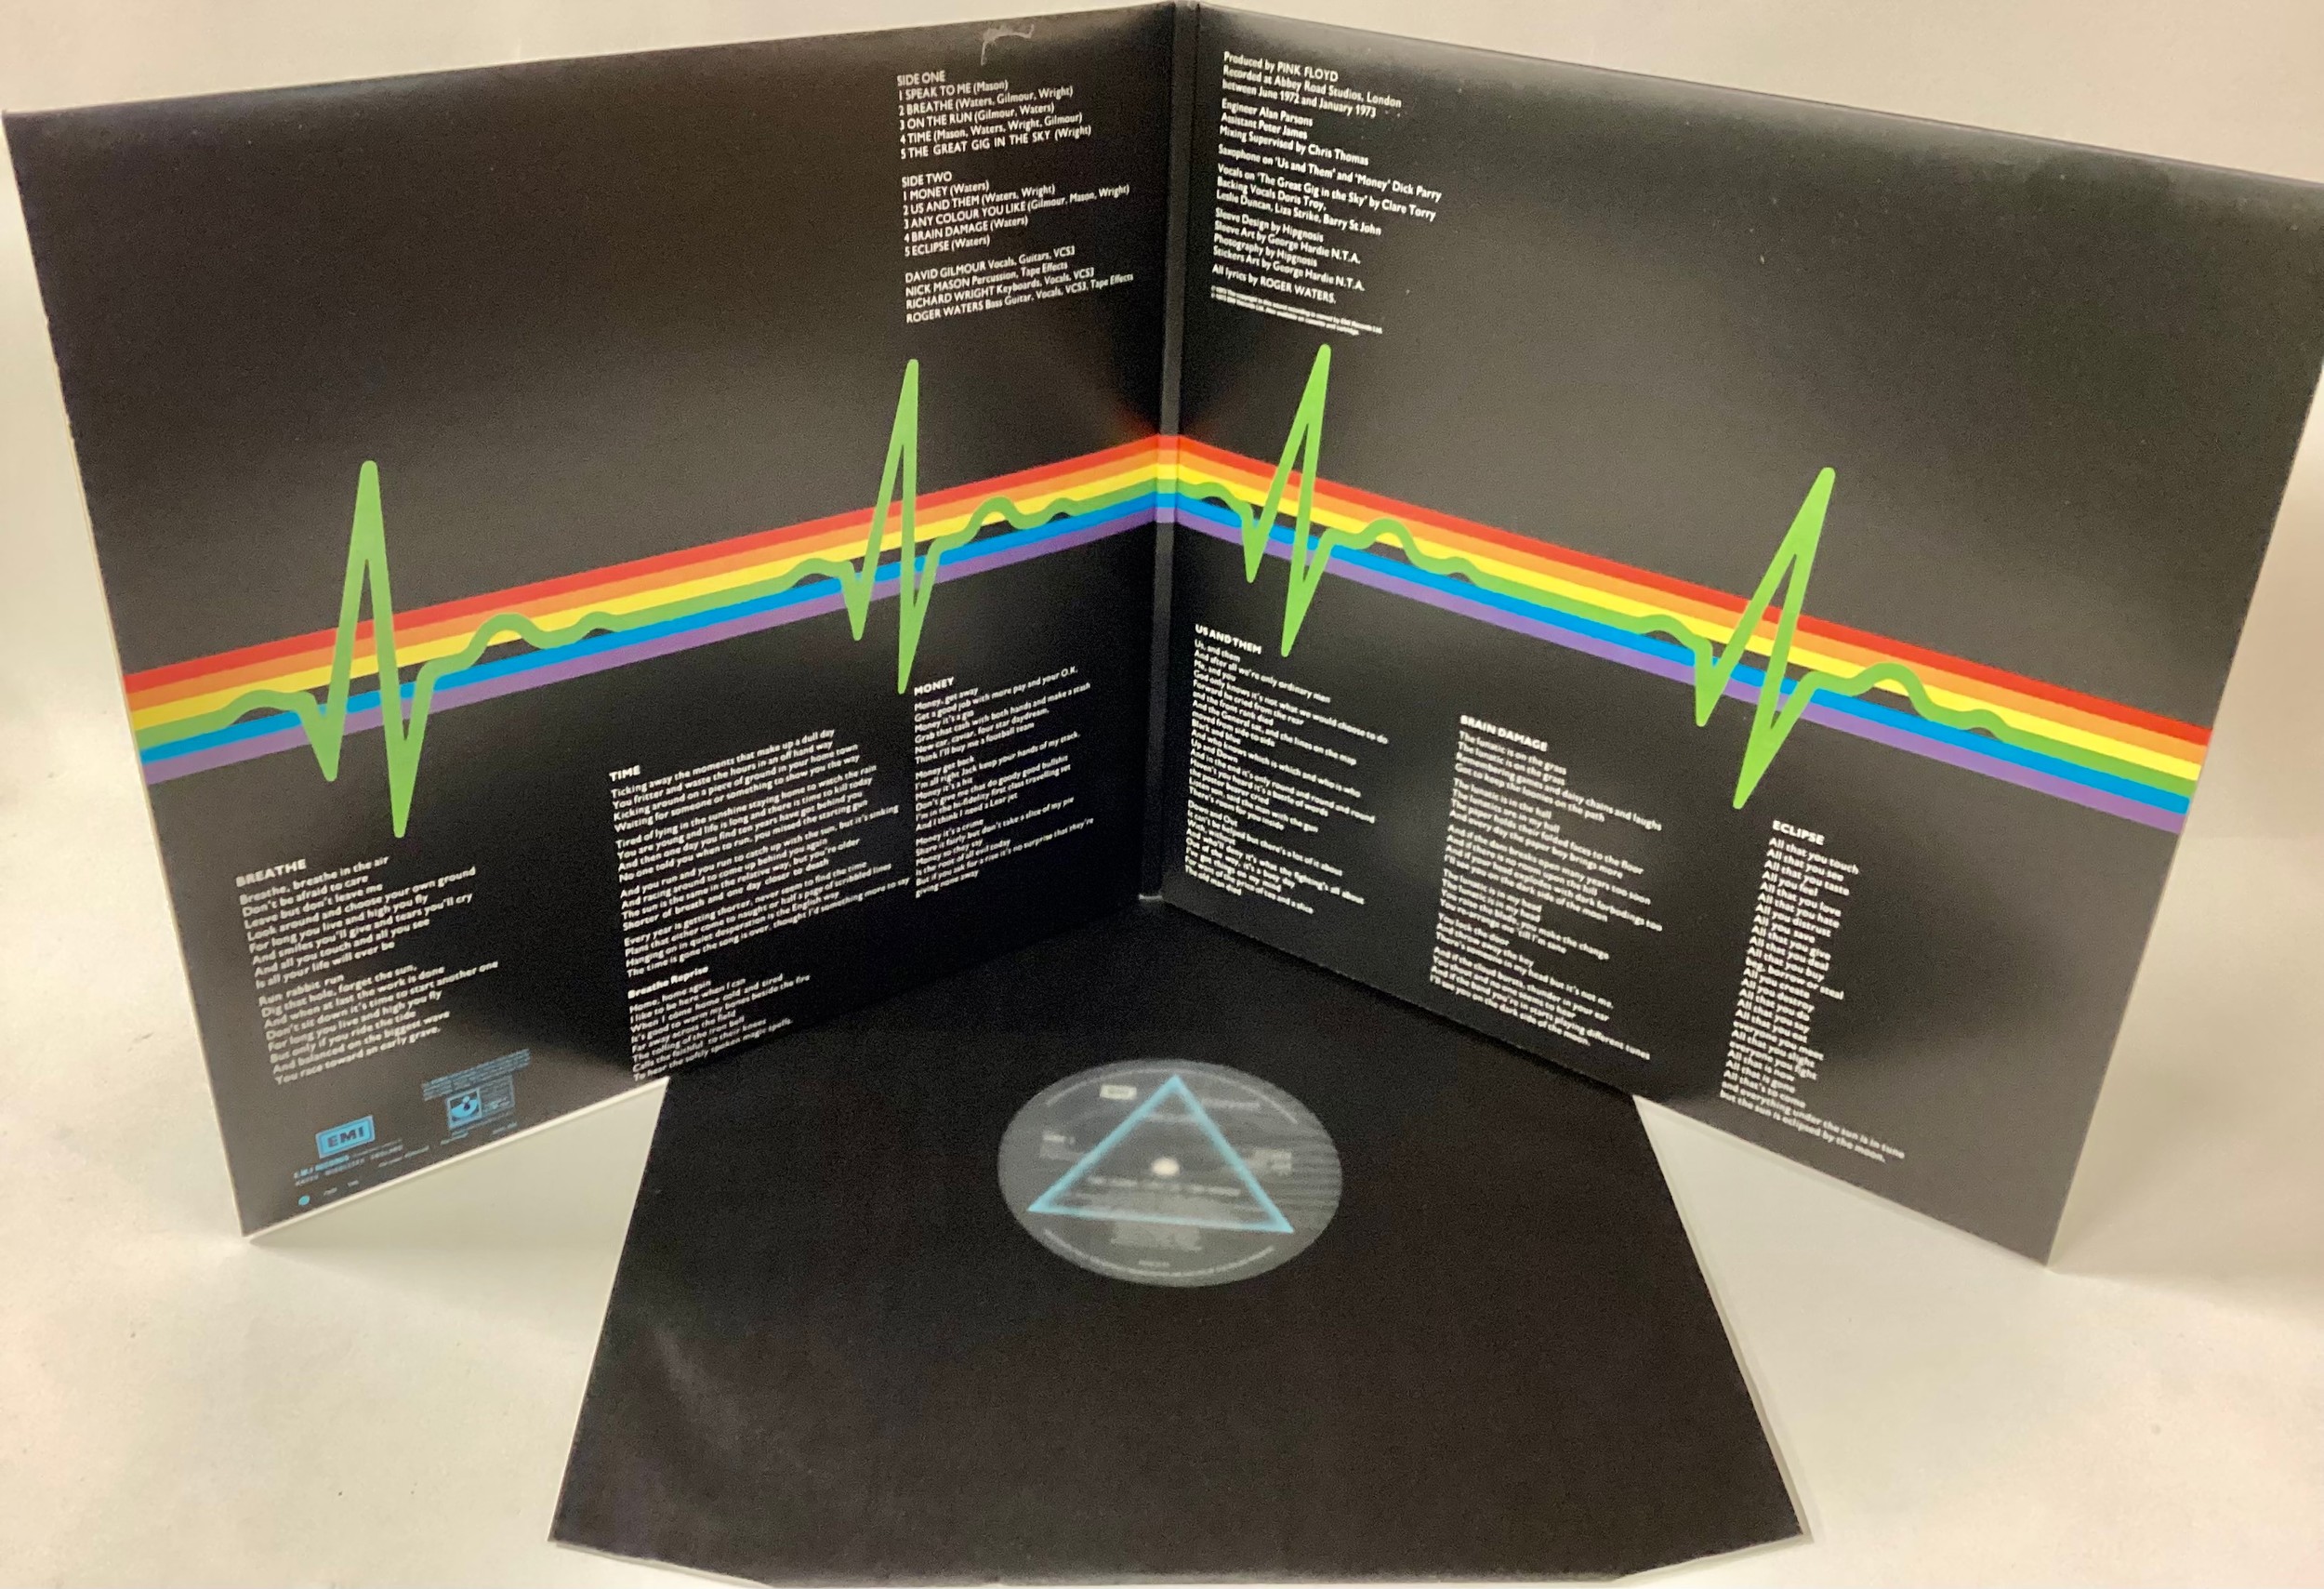 PINK FLOYD 30th ANNIVERSARY EDITION VINYL ALBUM ‘THE DARK SIDE OF THE ROOM’. Great mint condition - Image 3 of 6